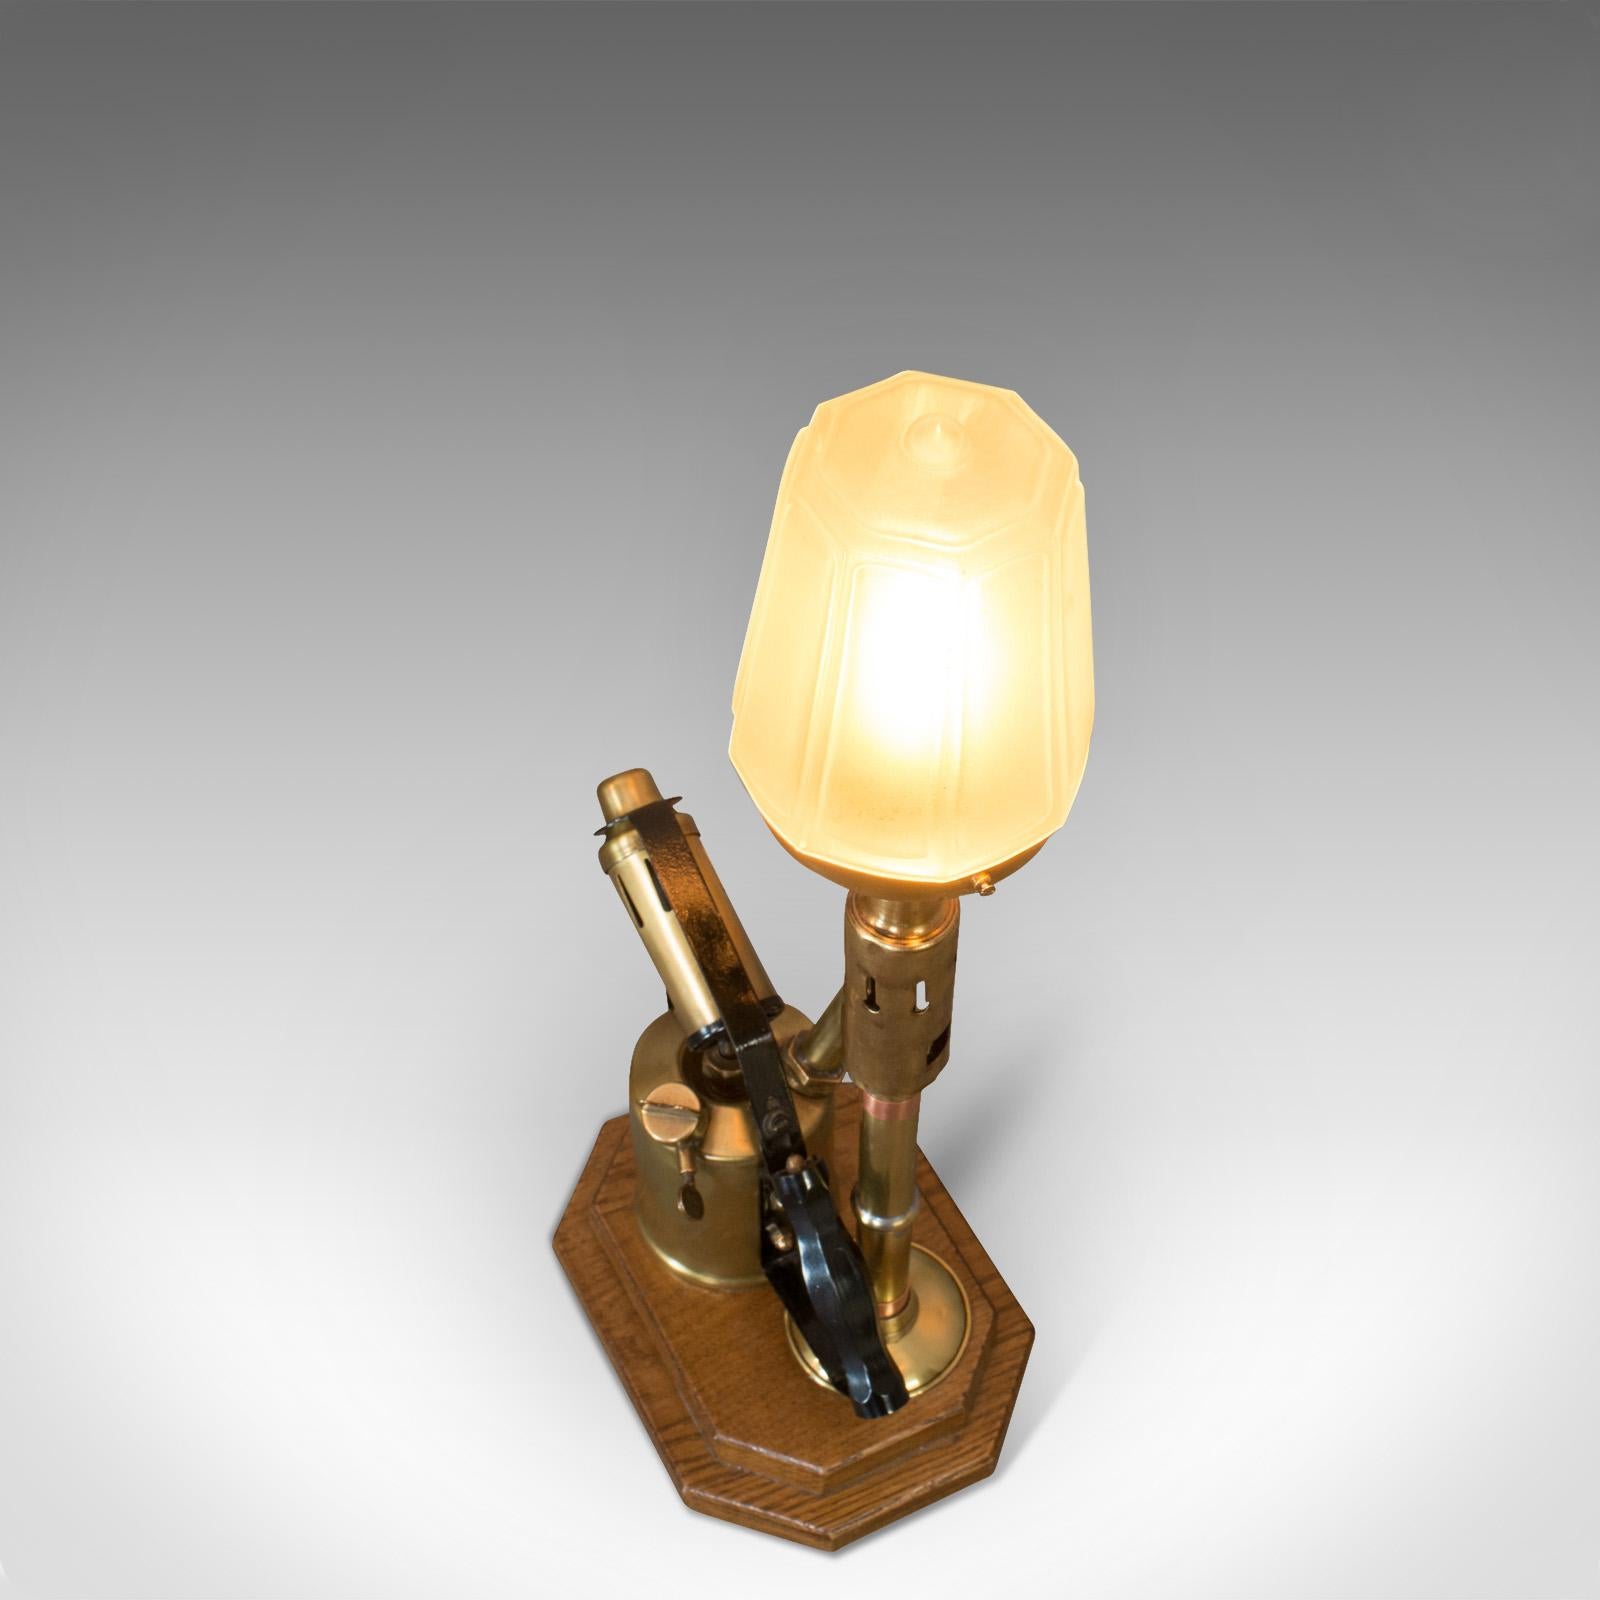 Vintage Decorative Lamp, English, Brass, Blow Torch, Light, Shade, Oak Base In Good Condition For Sale In Hele, Devon, GB